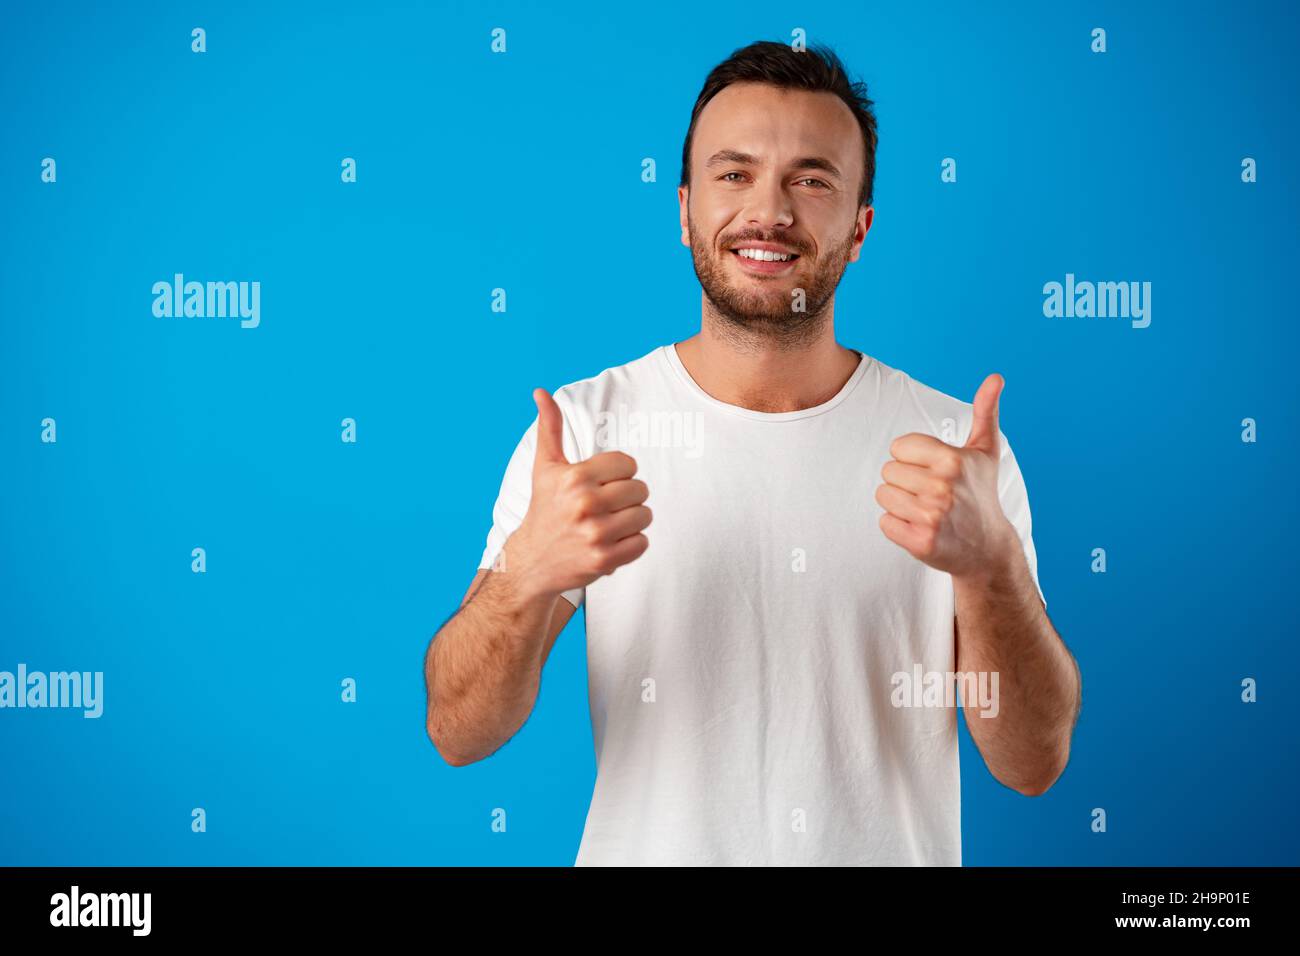 Portrait of cheerful man smiling and showing thumb up over blue background Stock Photo